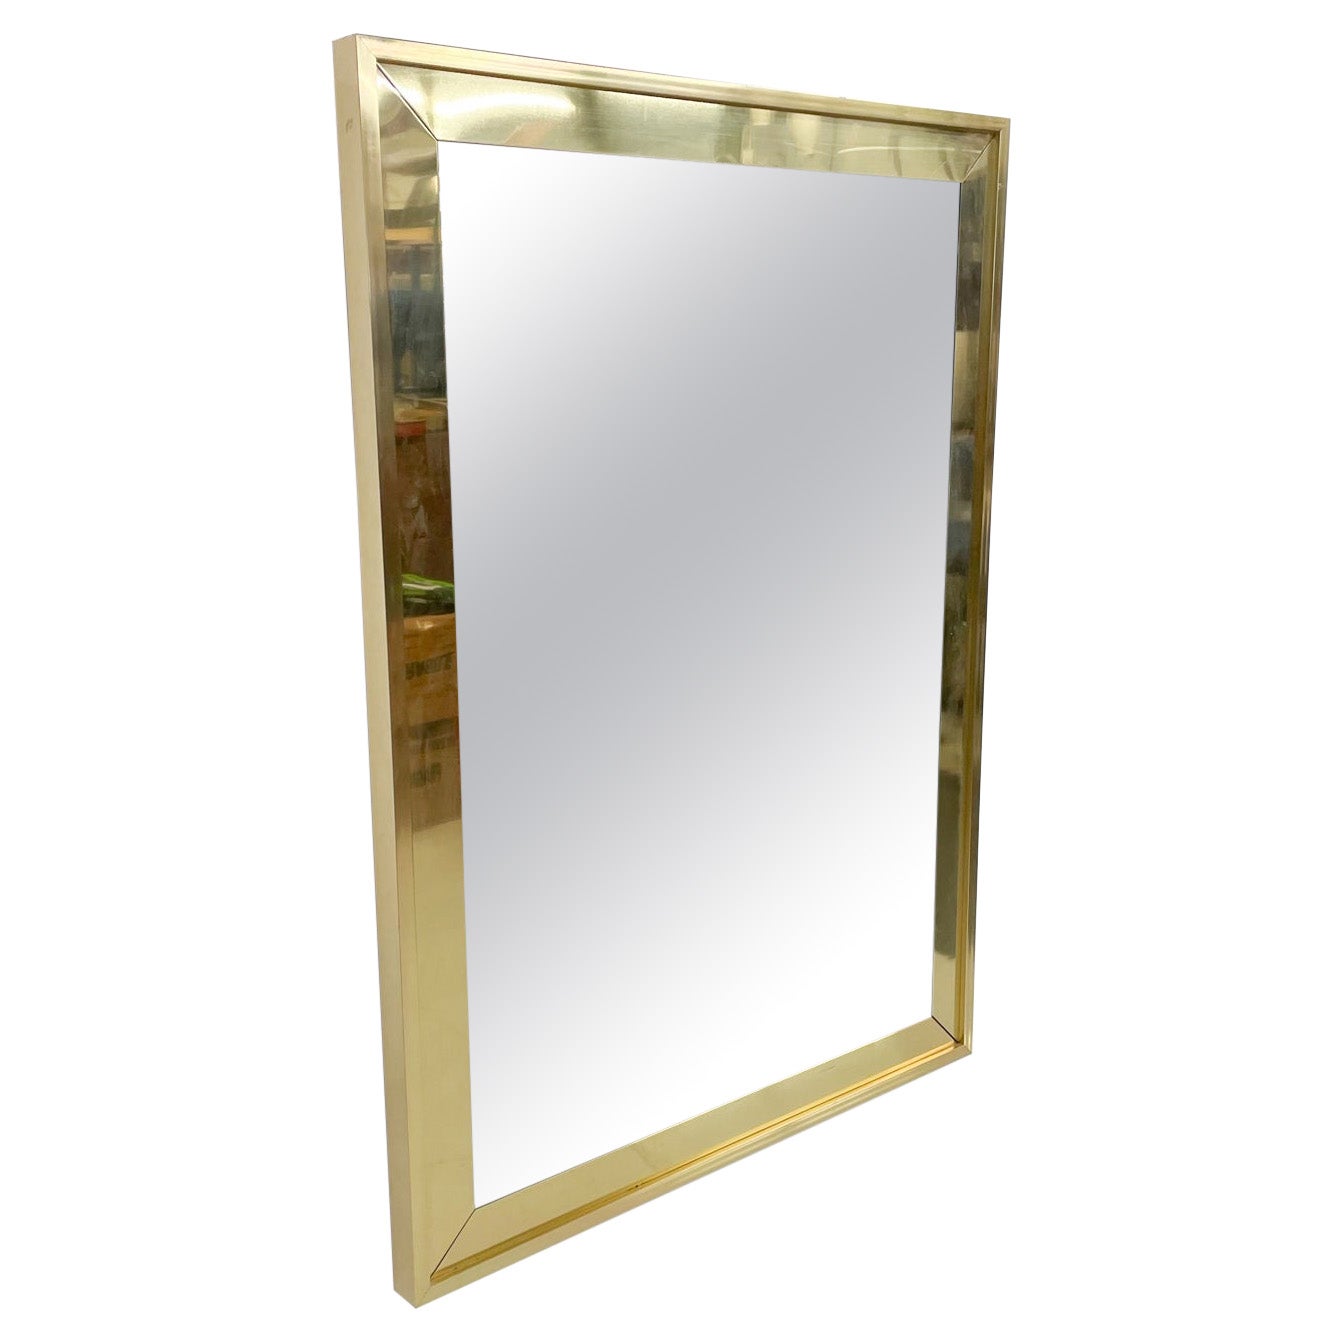 1973 Custom Brass Mirror Signed by designer Carl Canner Boston MA Carvers' Guild
Original Preowned Unrestored Vintage Condition. Light wear. Scuffs present around edges. Patina present.
Not new expect vintage wear.
Review all images.
42.78 h x 30.25